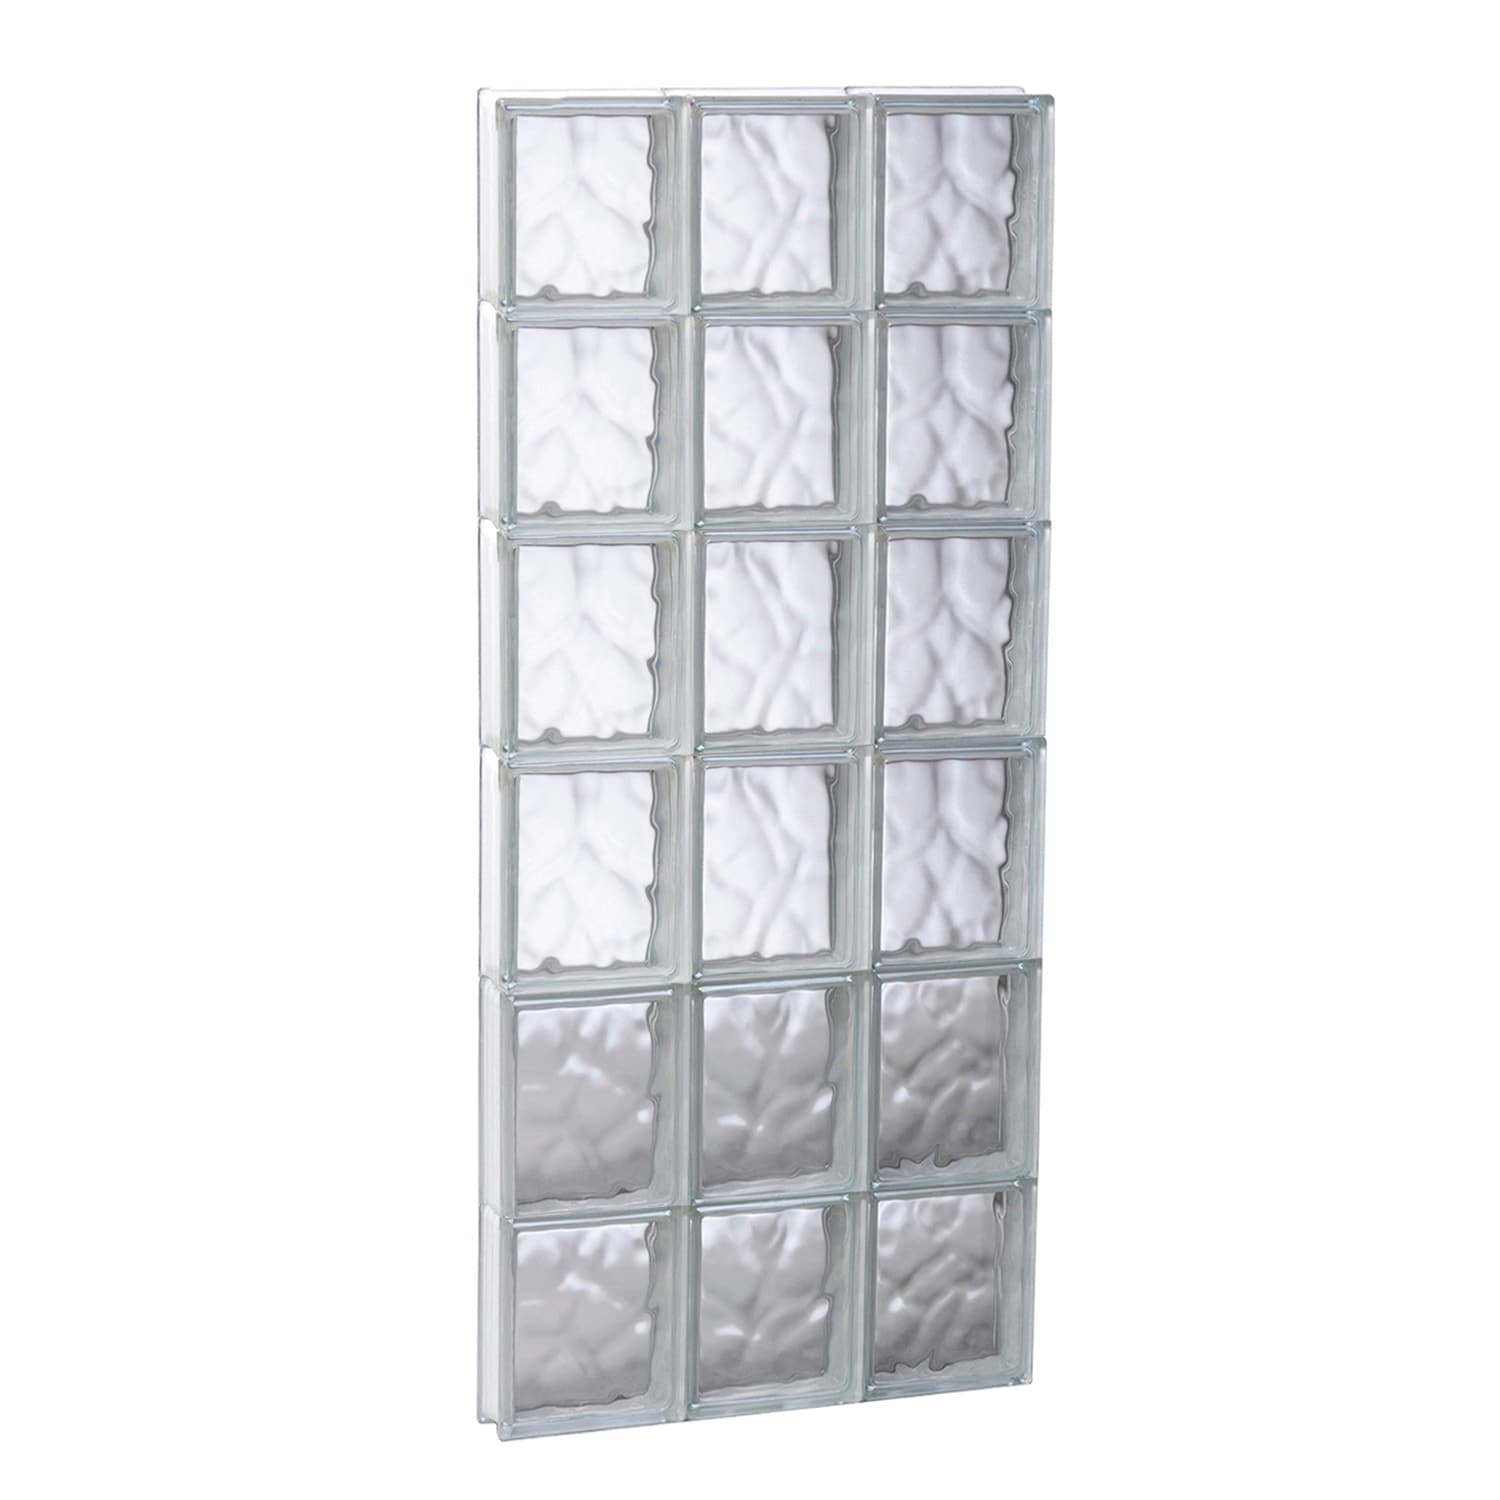 18-in x 48-in Windows at Lowes.com